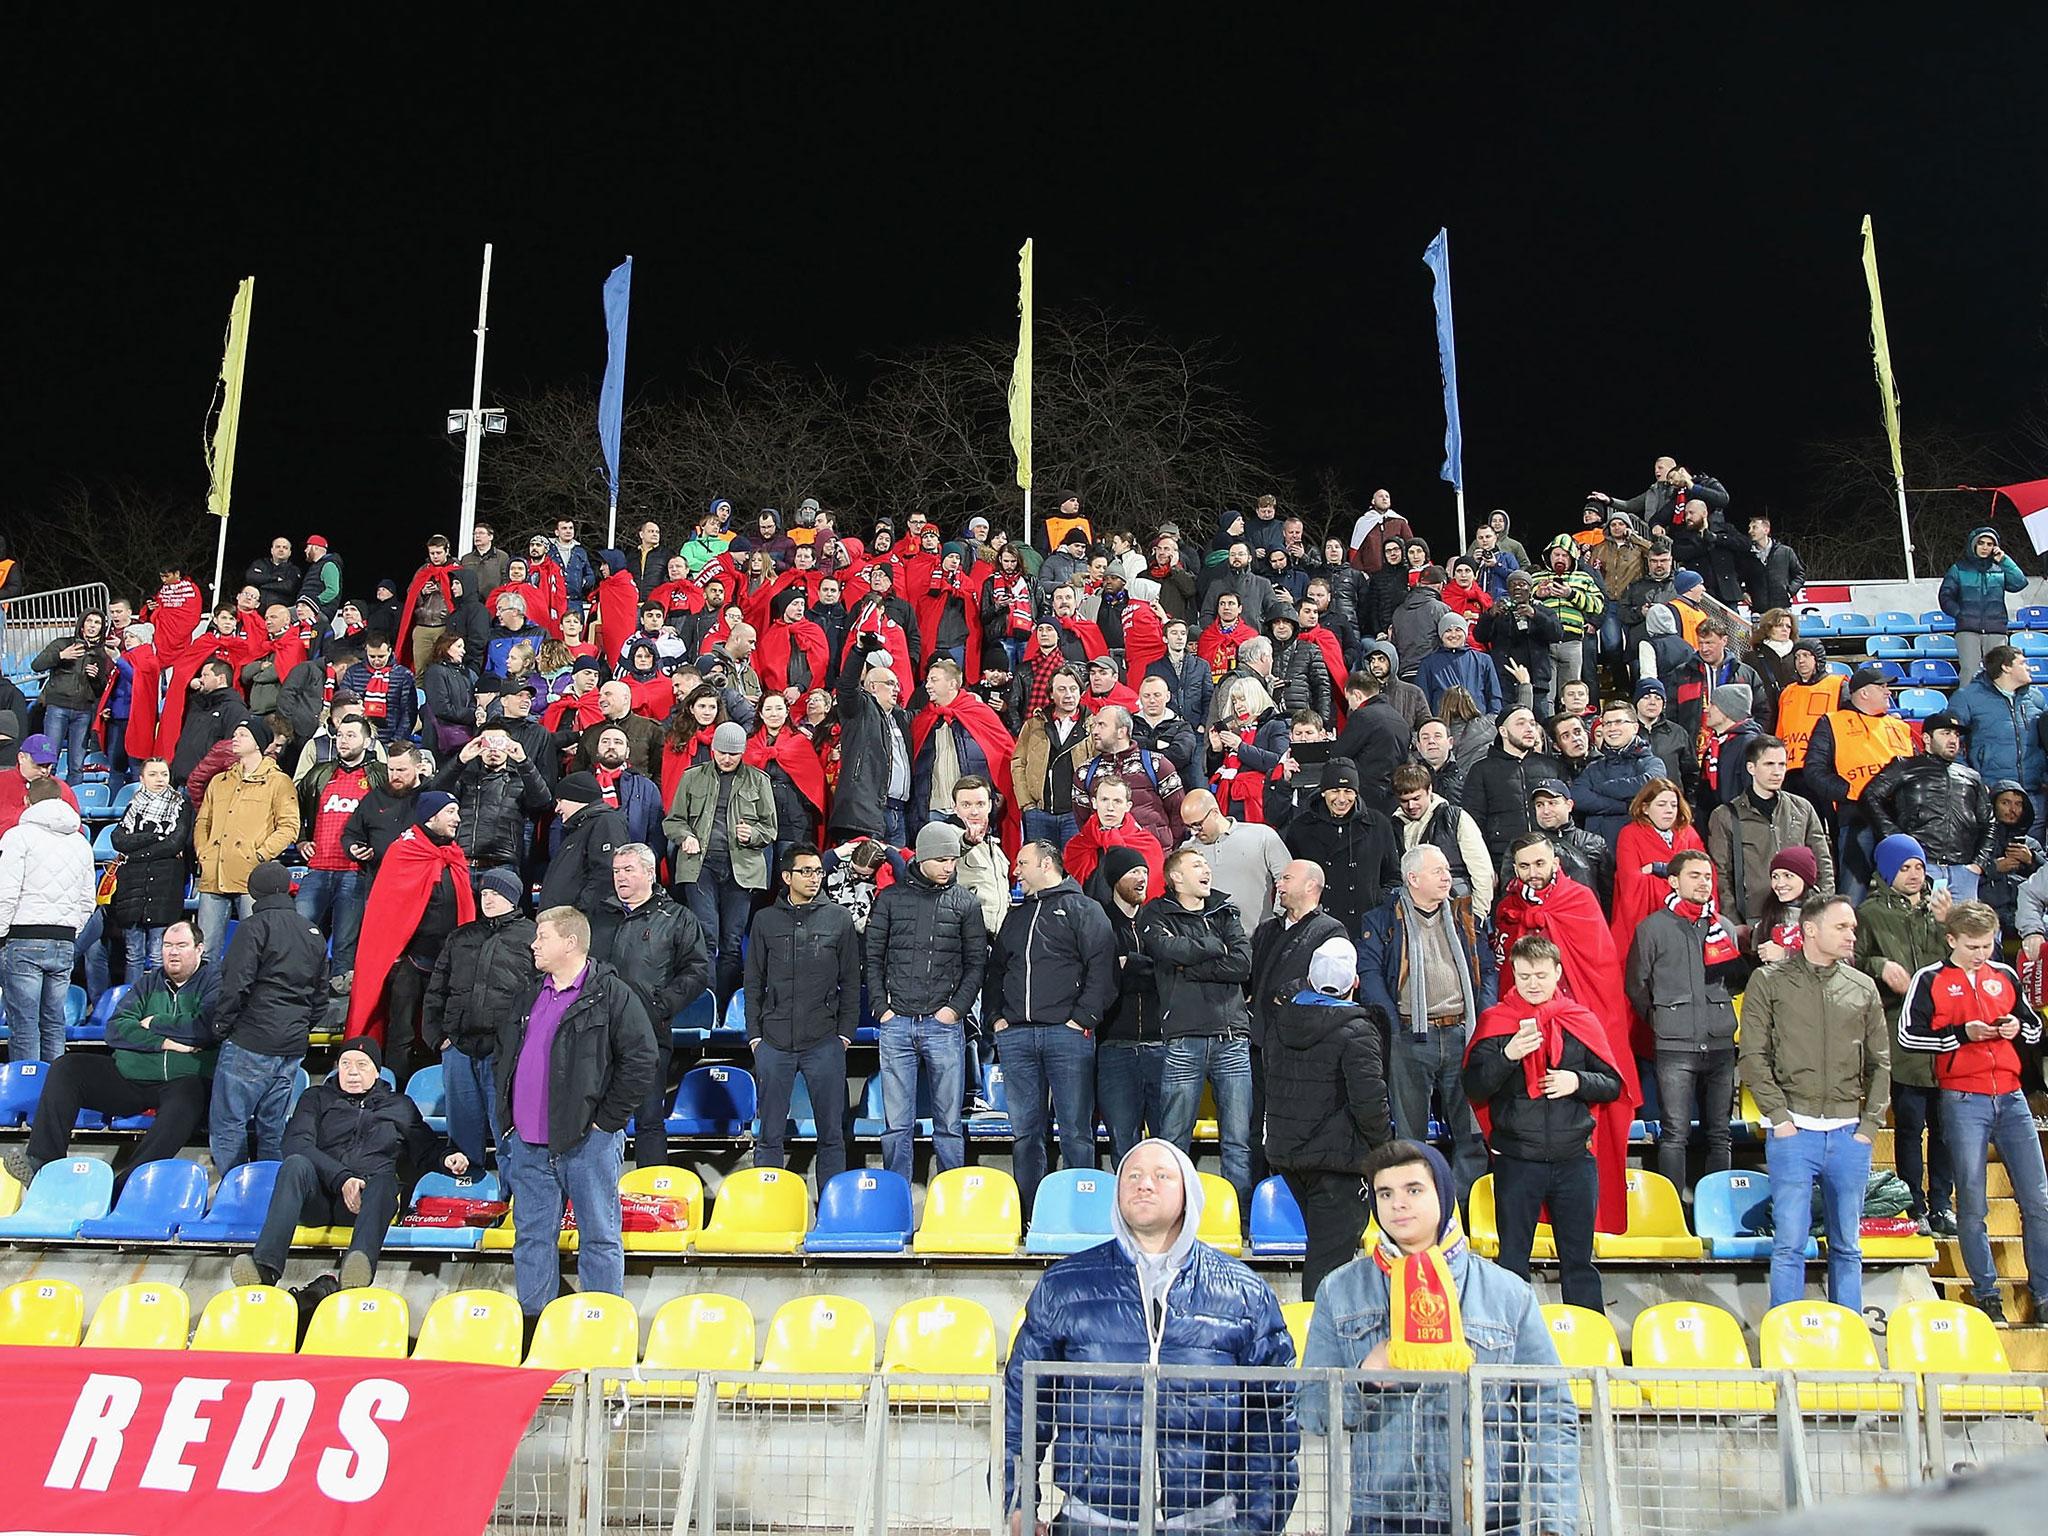 A number of Manchester United fans were draped in blankets during the match against Rostov